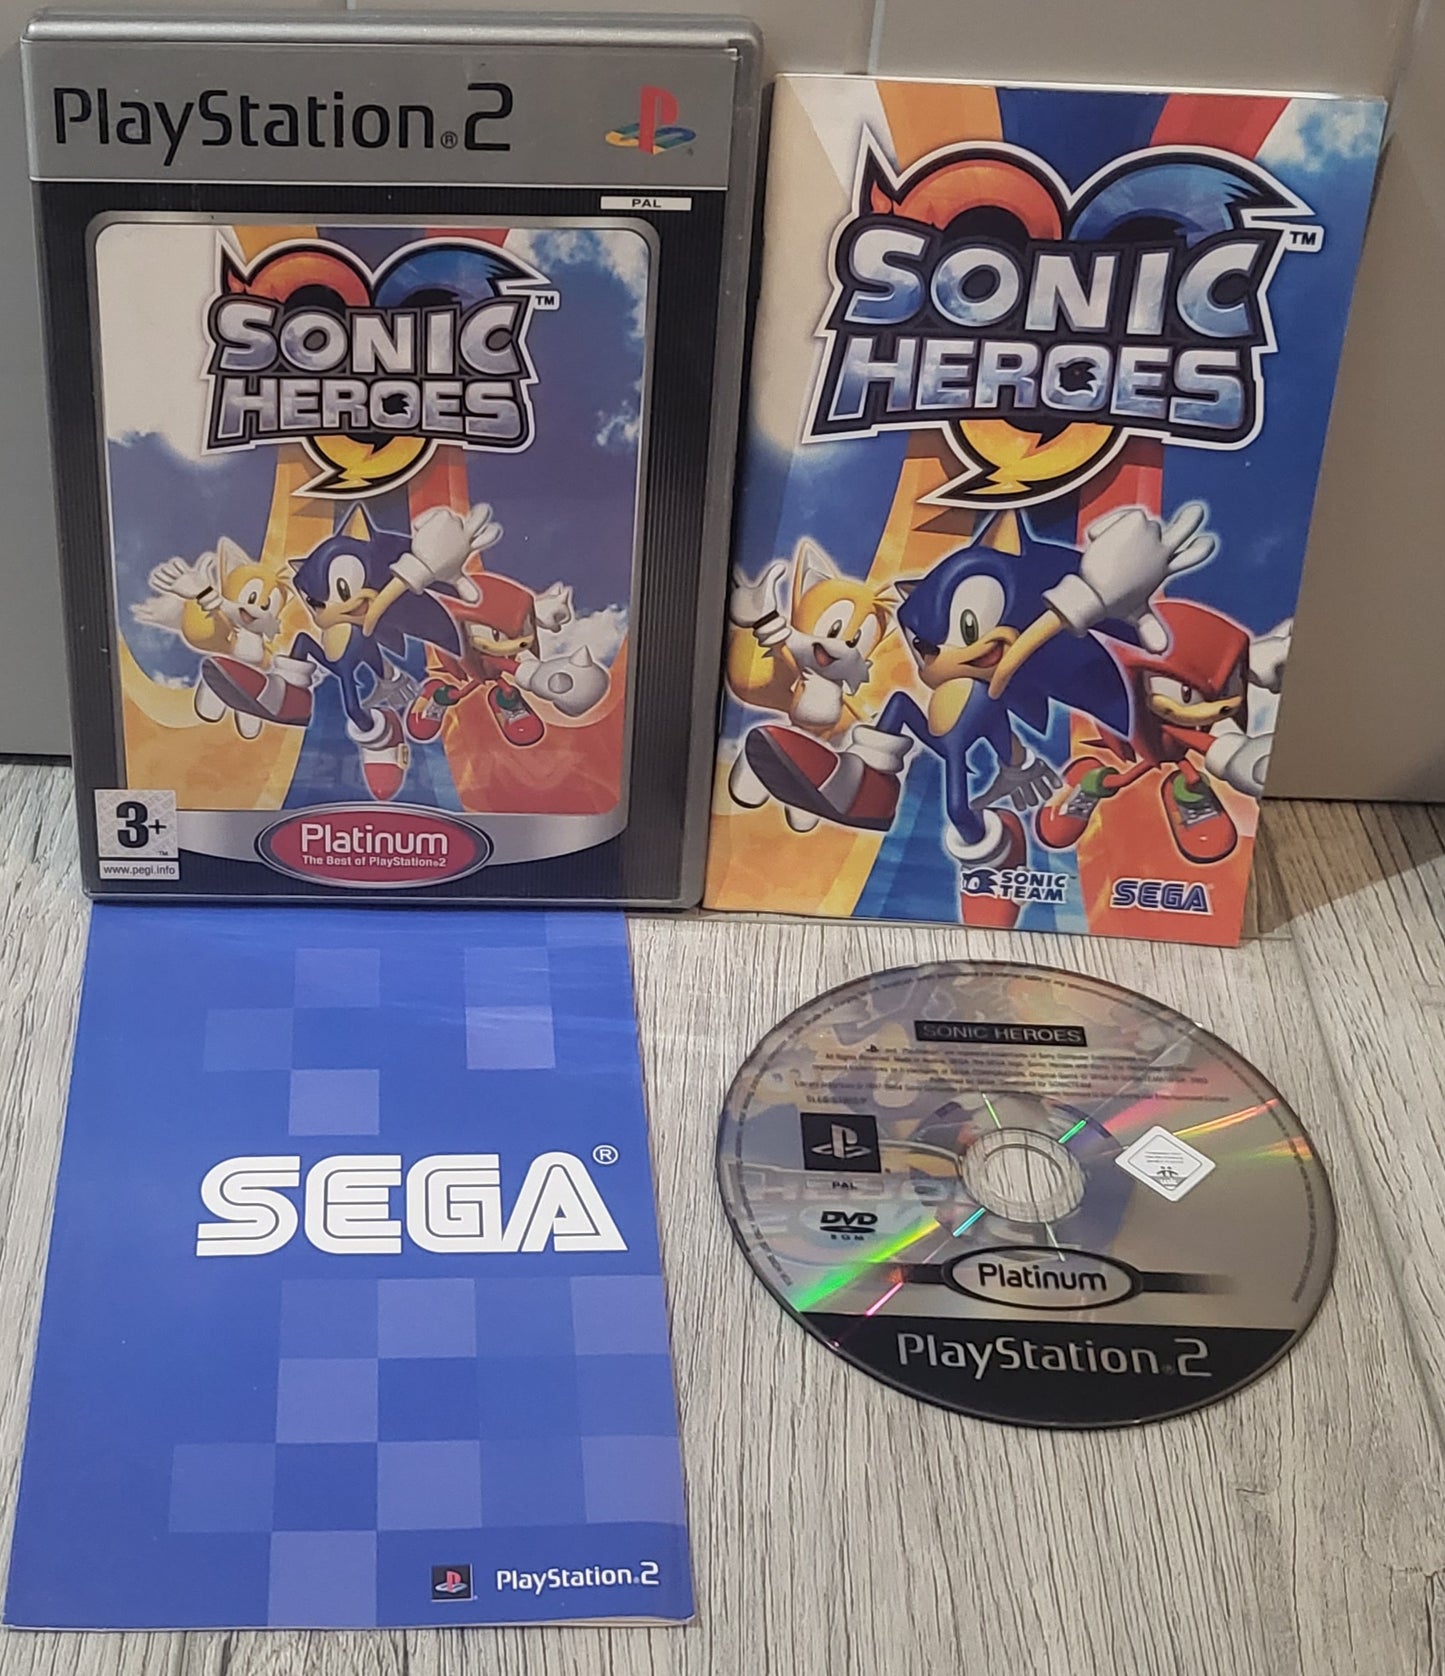 Sonic Heroes Platinum Sony Playstation 2 (PS2) Game